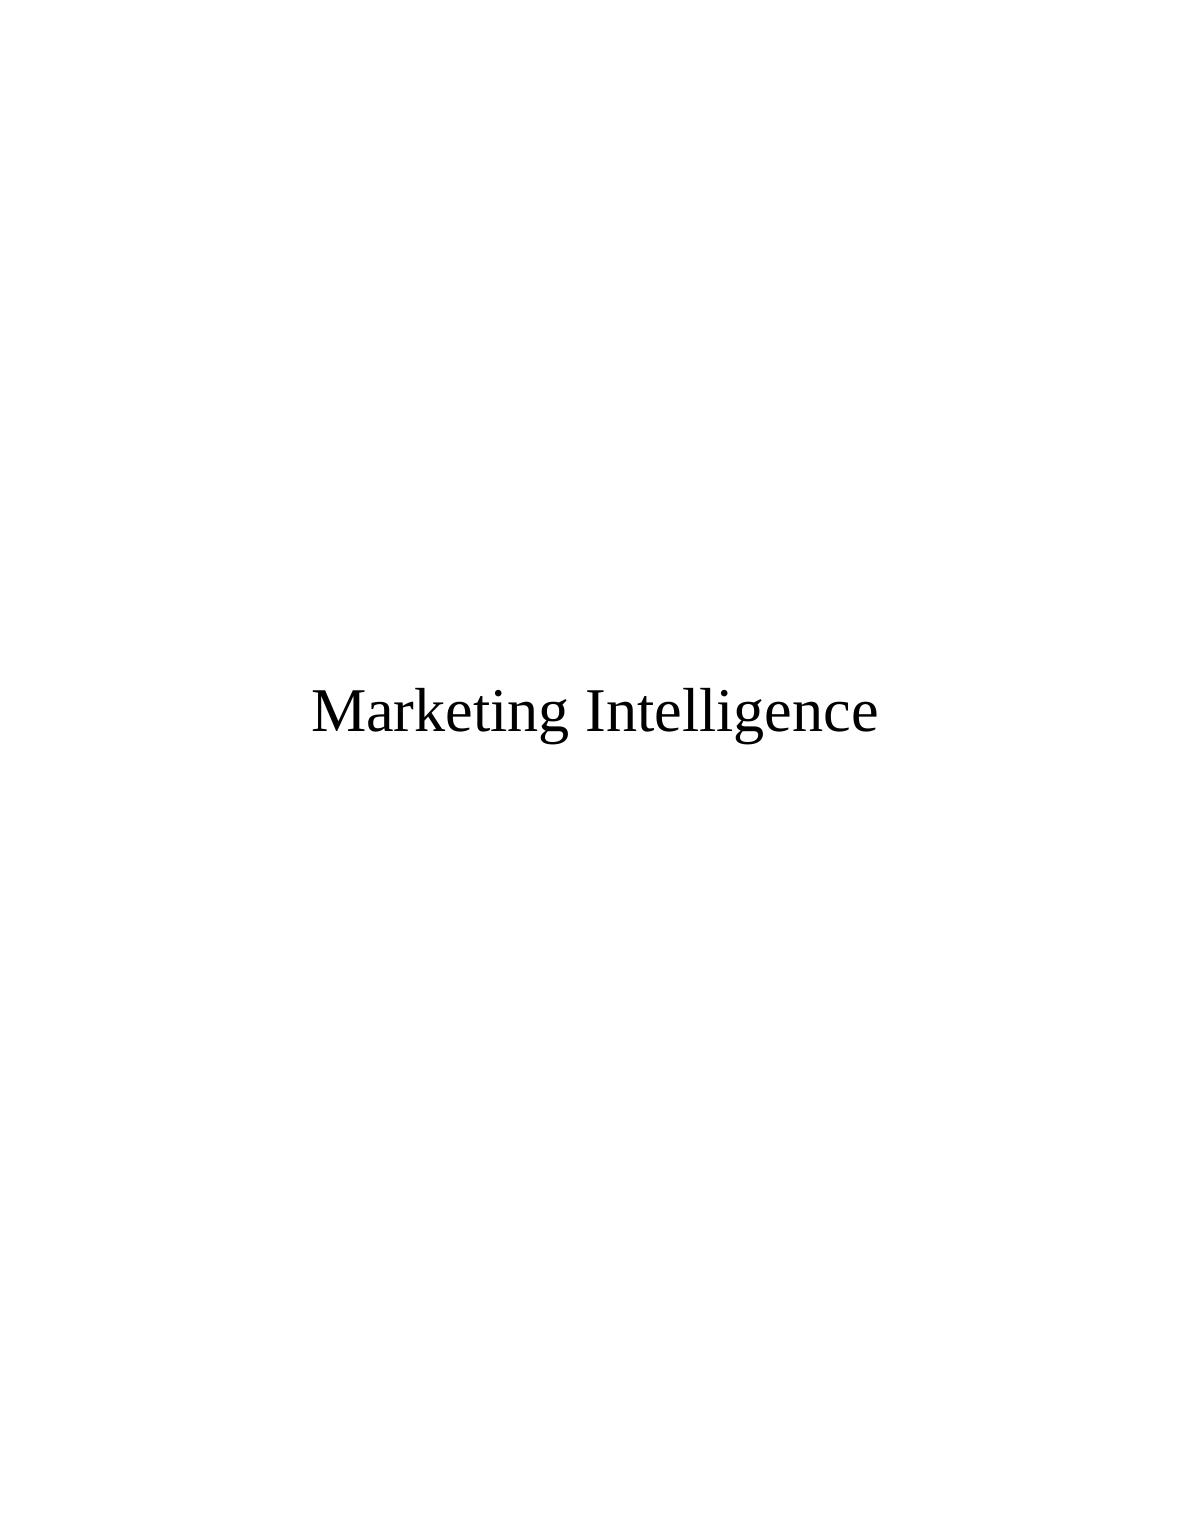 Report on Marketing Intelligence in Company_1